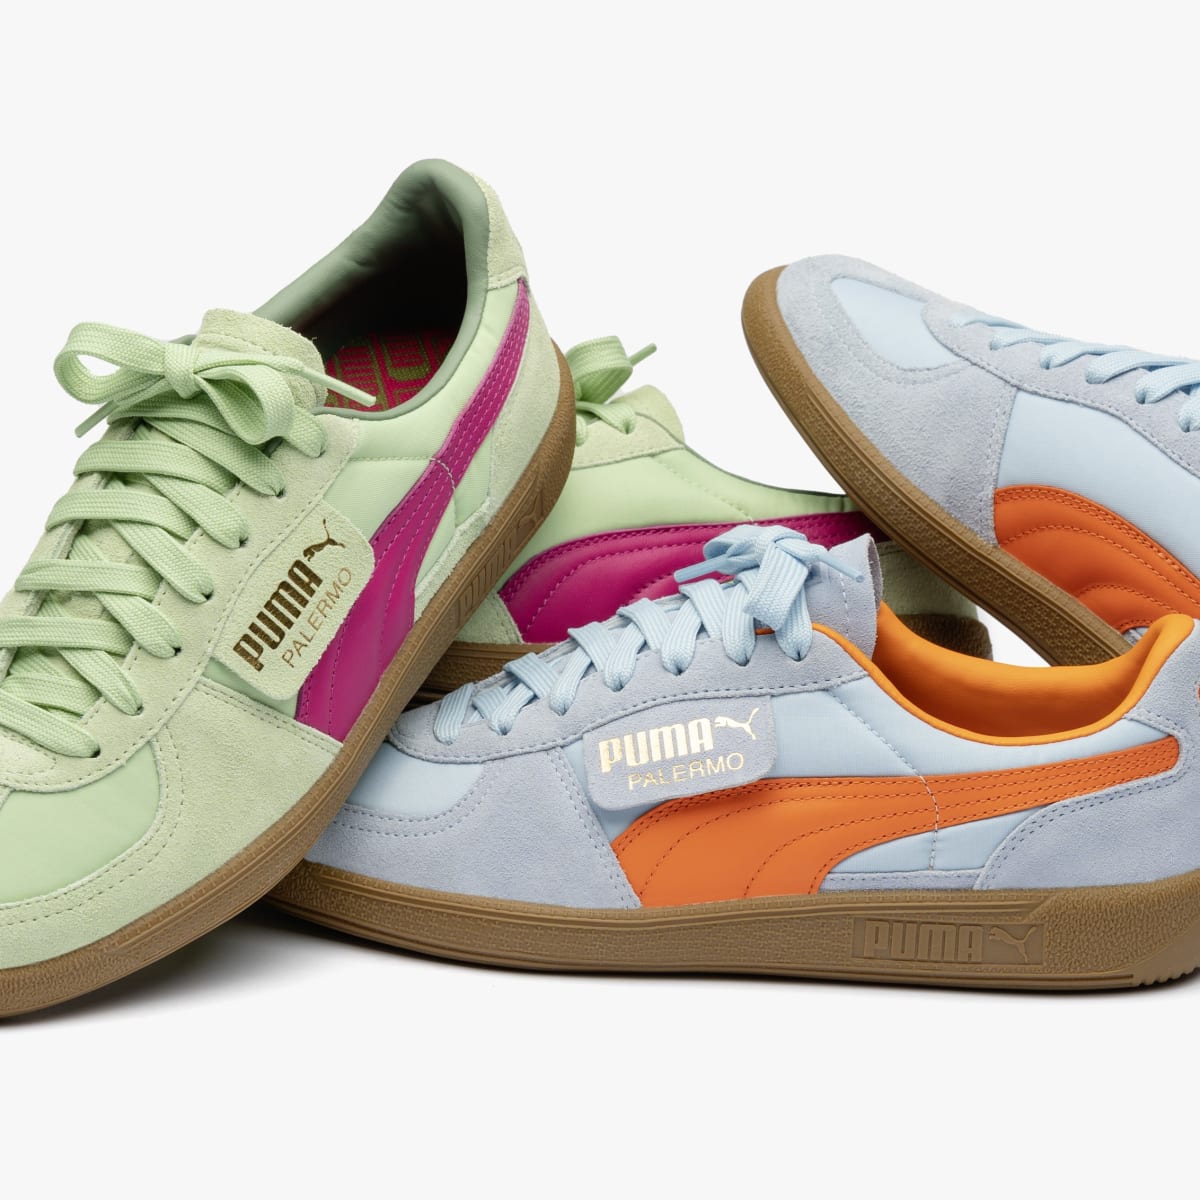 The PUMA Palermo Honors Italian Scenery With Two New Colorways